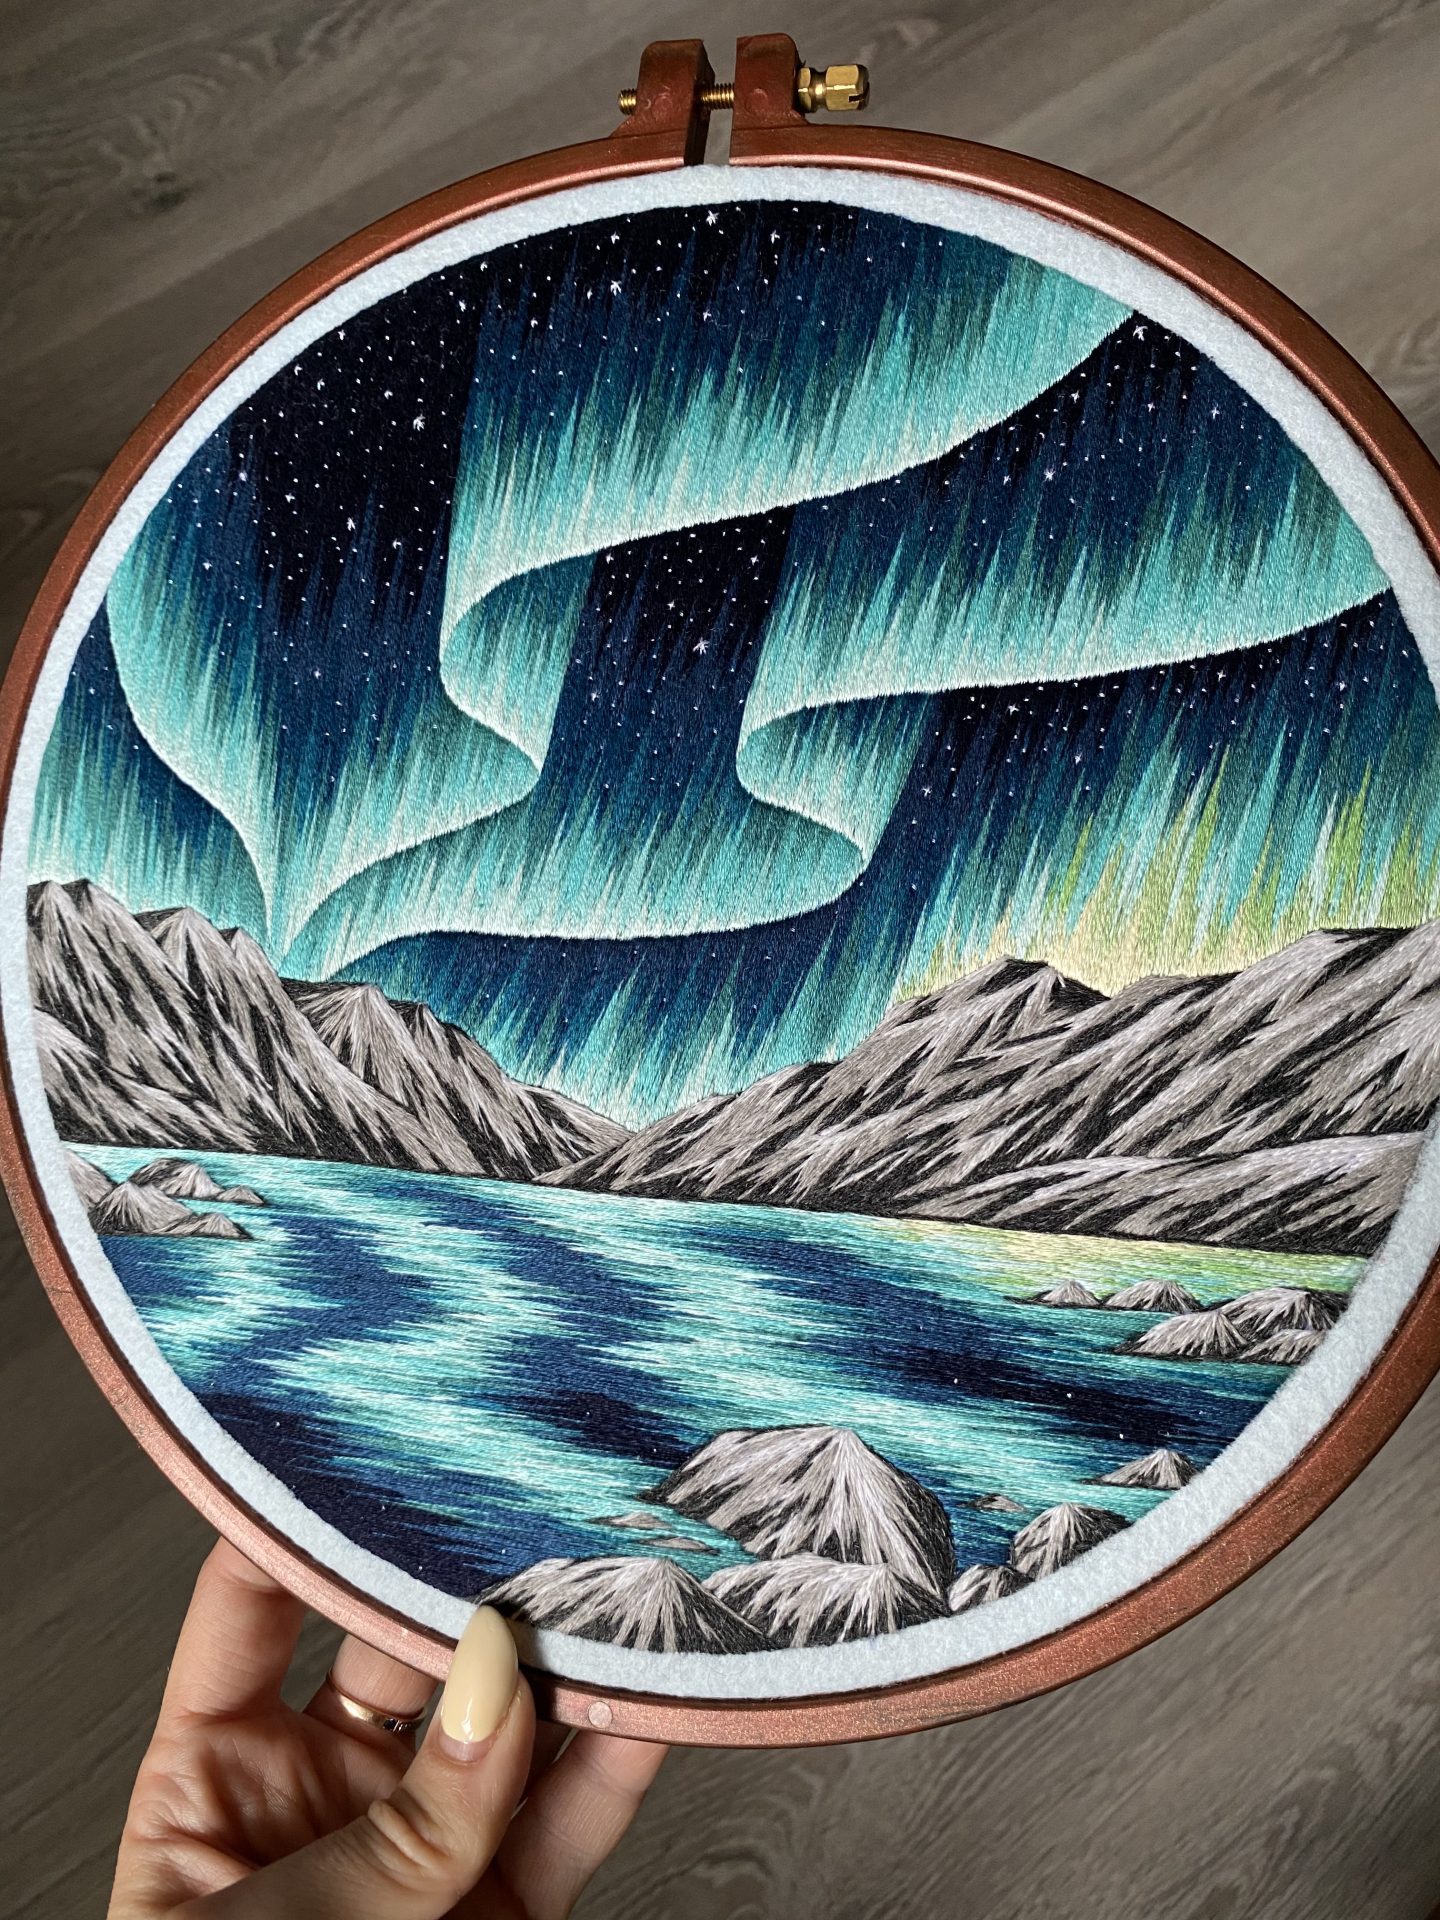 Landscape Embroidery Art Encapsulates the Beauty of the Northern